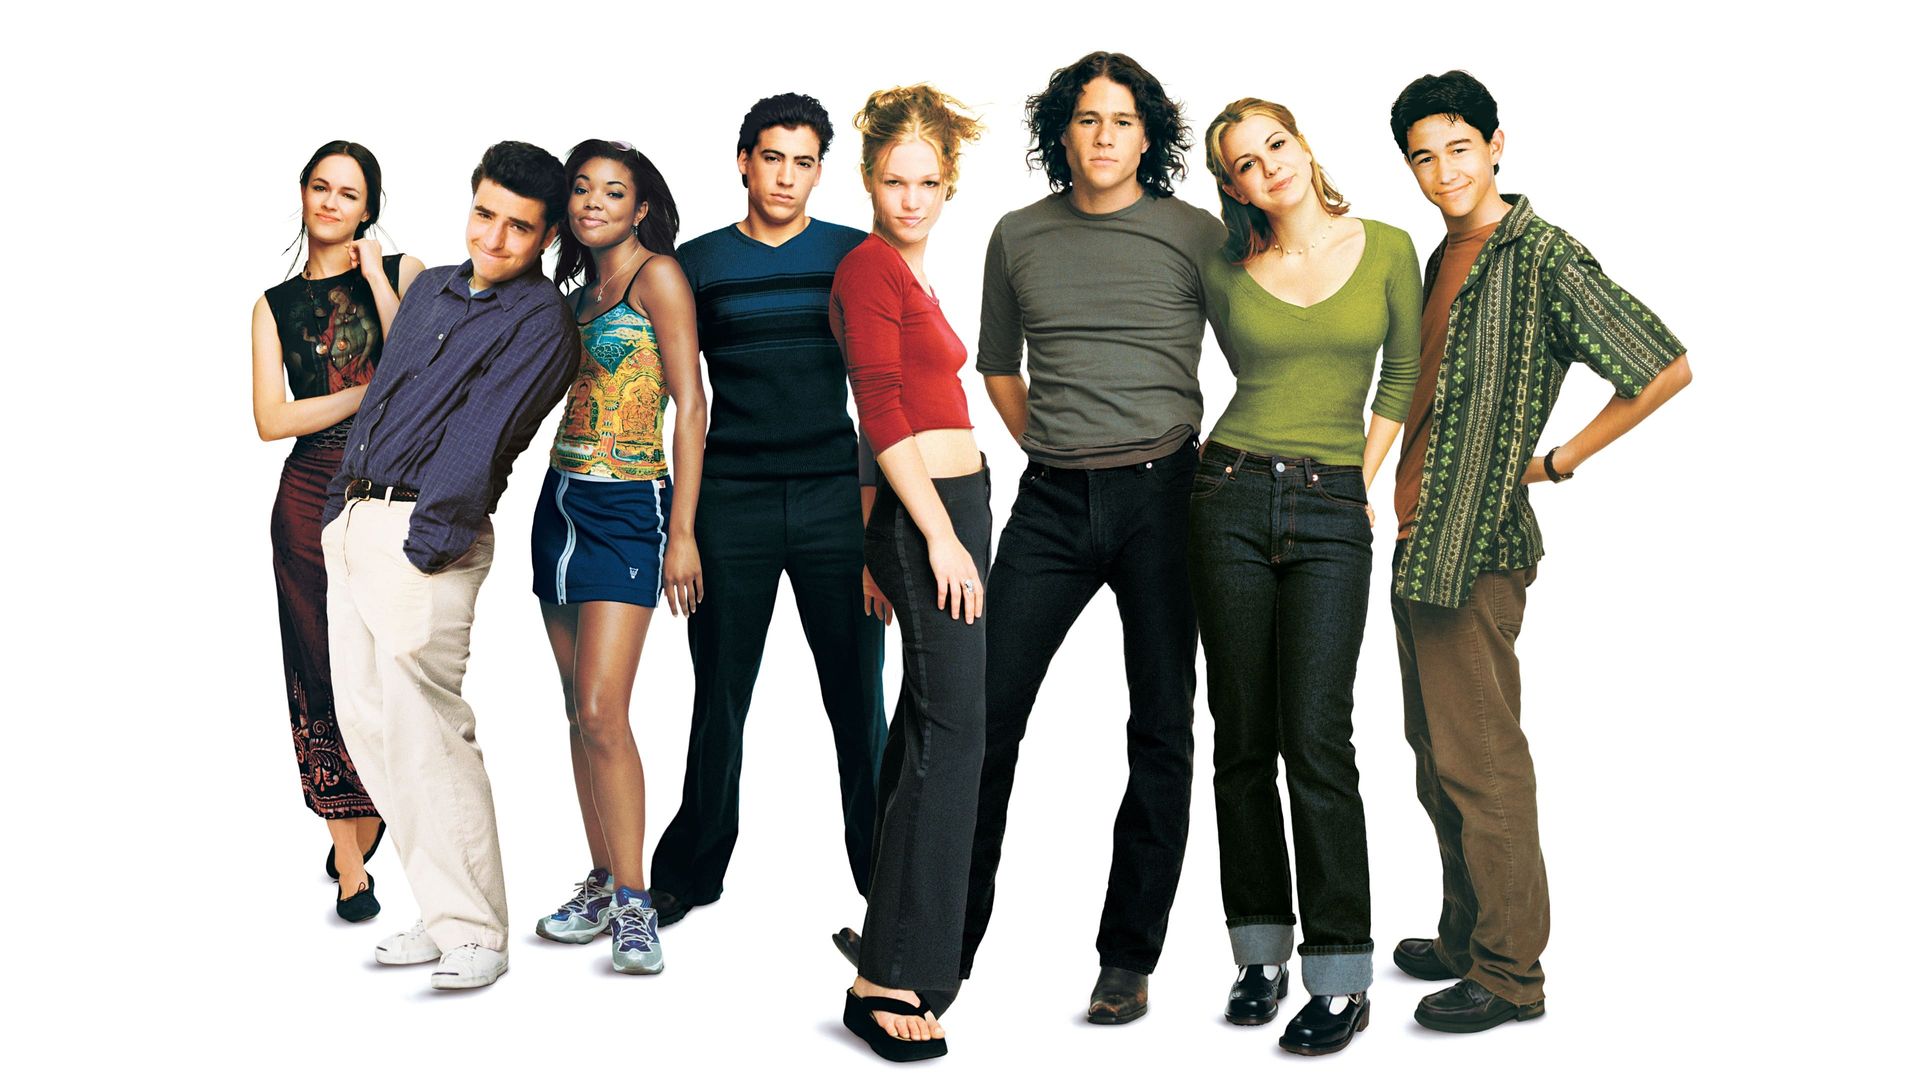 10 Things I Hate About You Backdrop